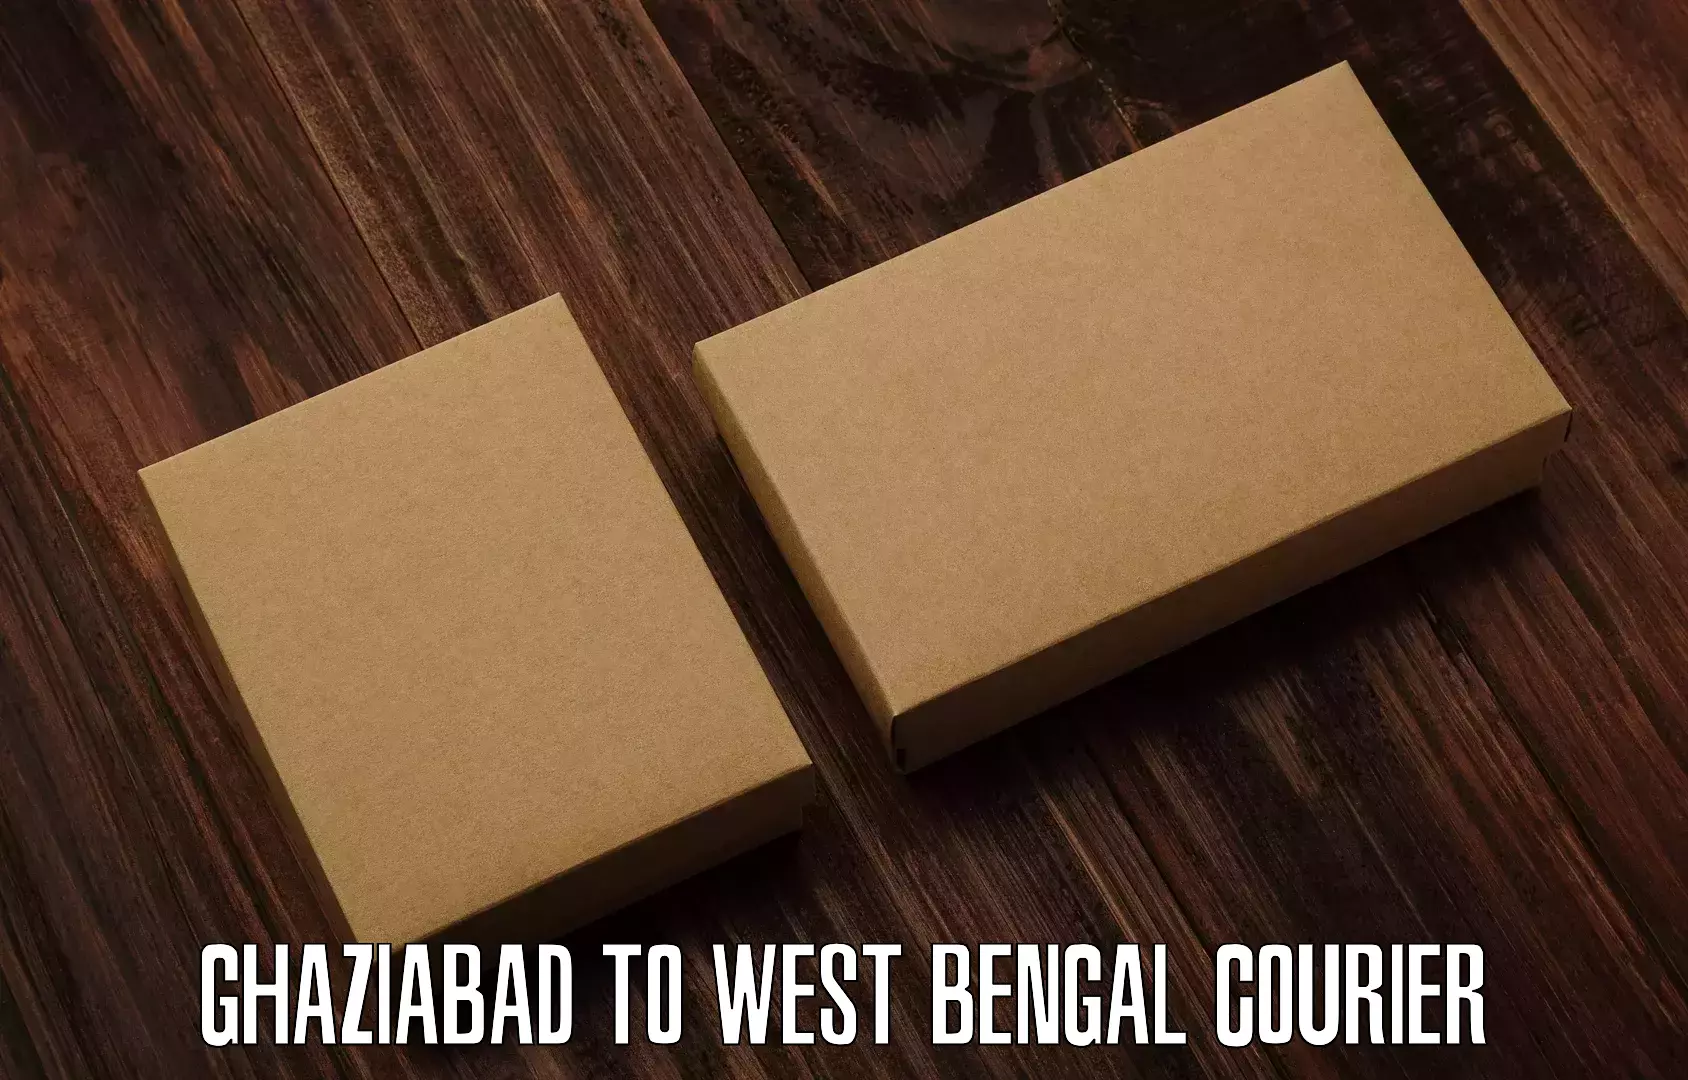 Nationwide delivery network Ghaziabad to West Bengal